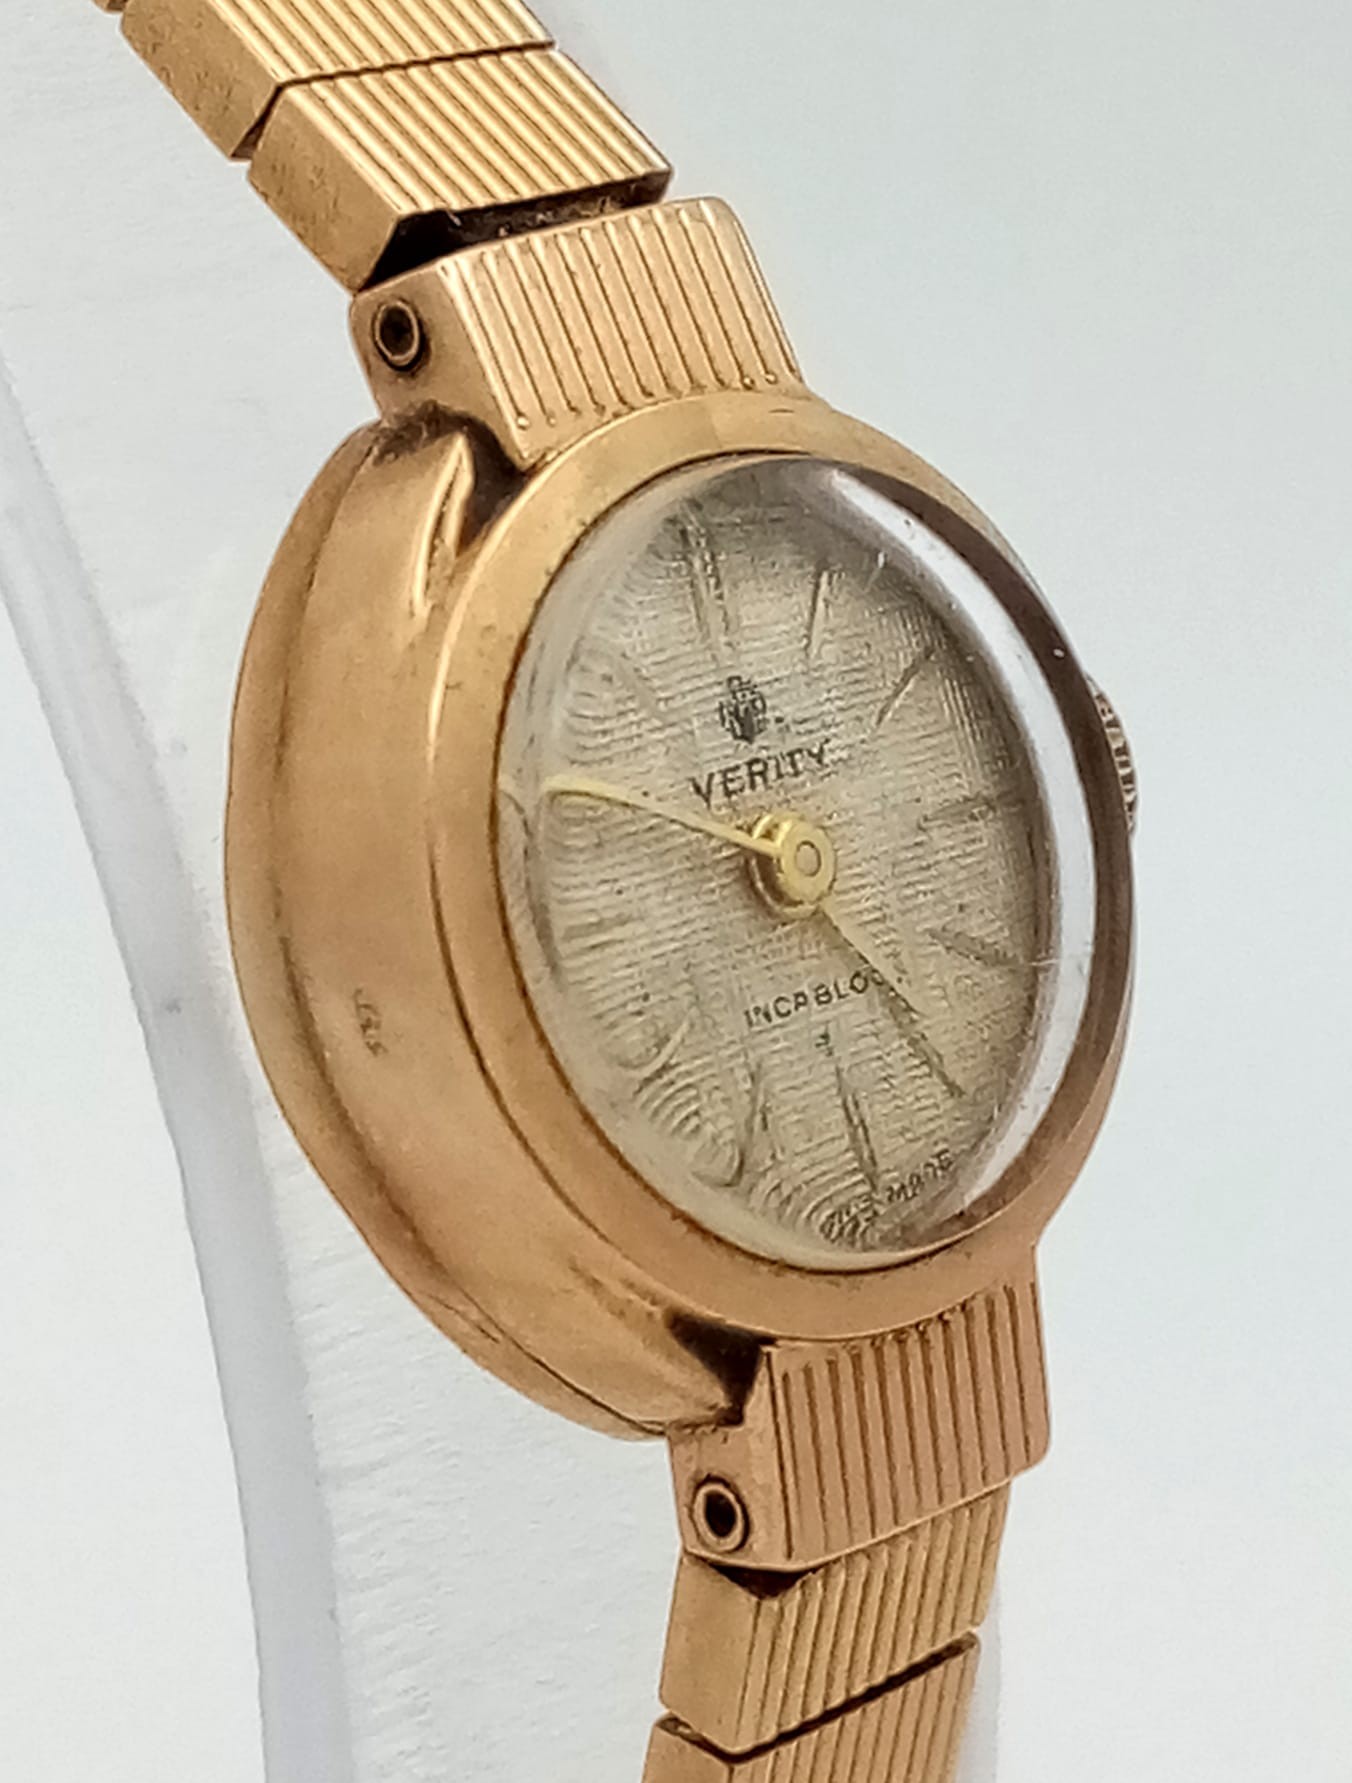 A Vintage 9K Yellow Gold Verity Ladies Watch. 9K gold bracelet and 9K gold oval case - 15mm. - Image 7 of 7